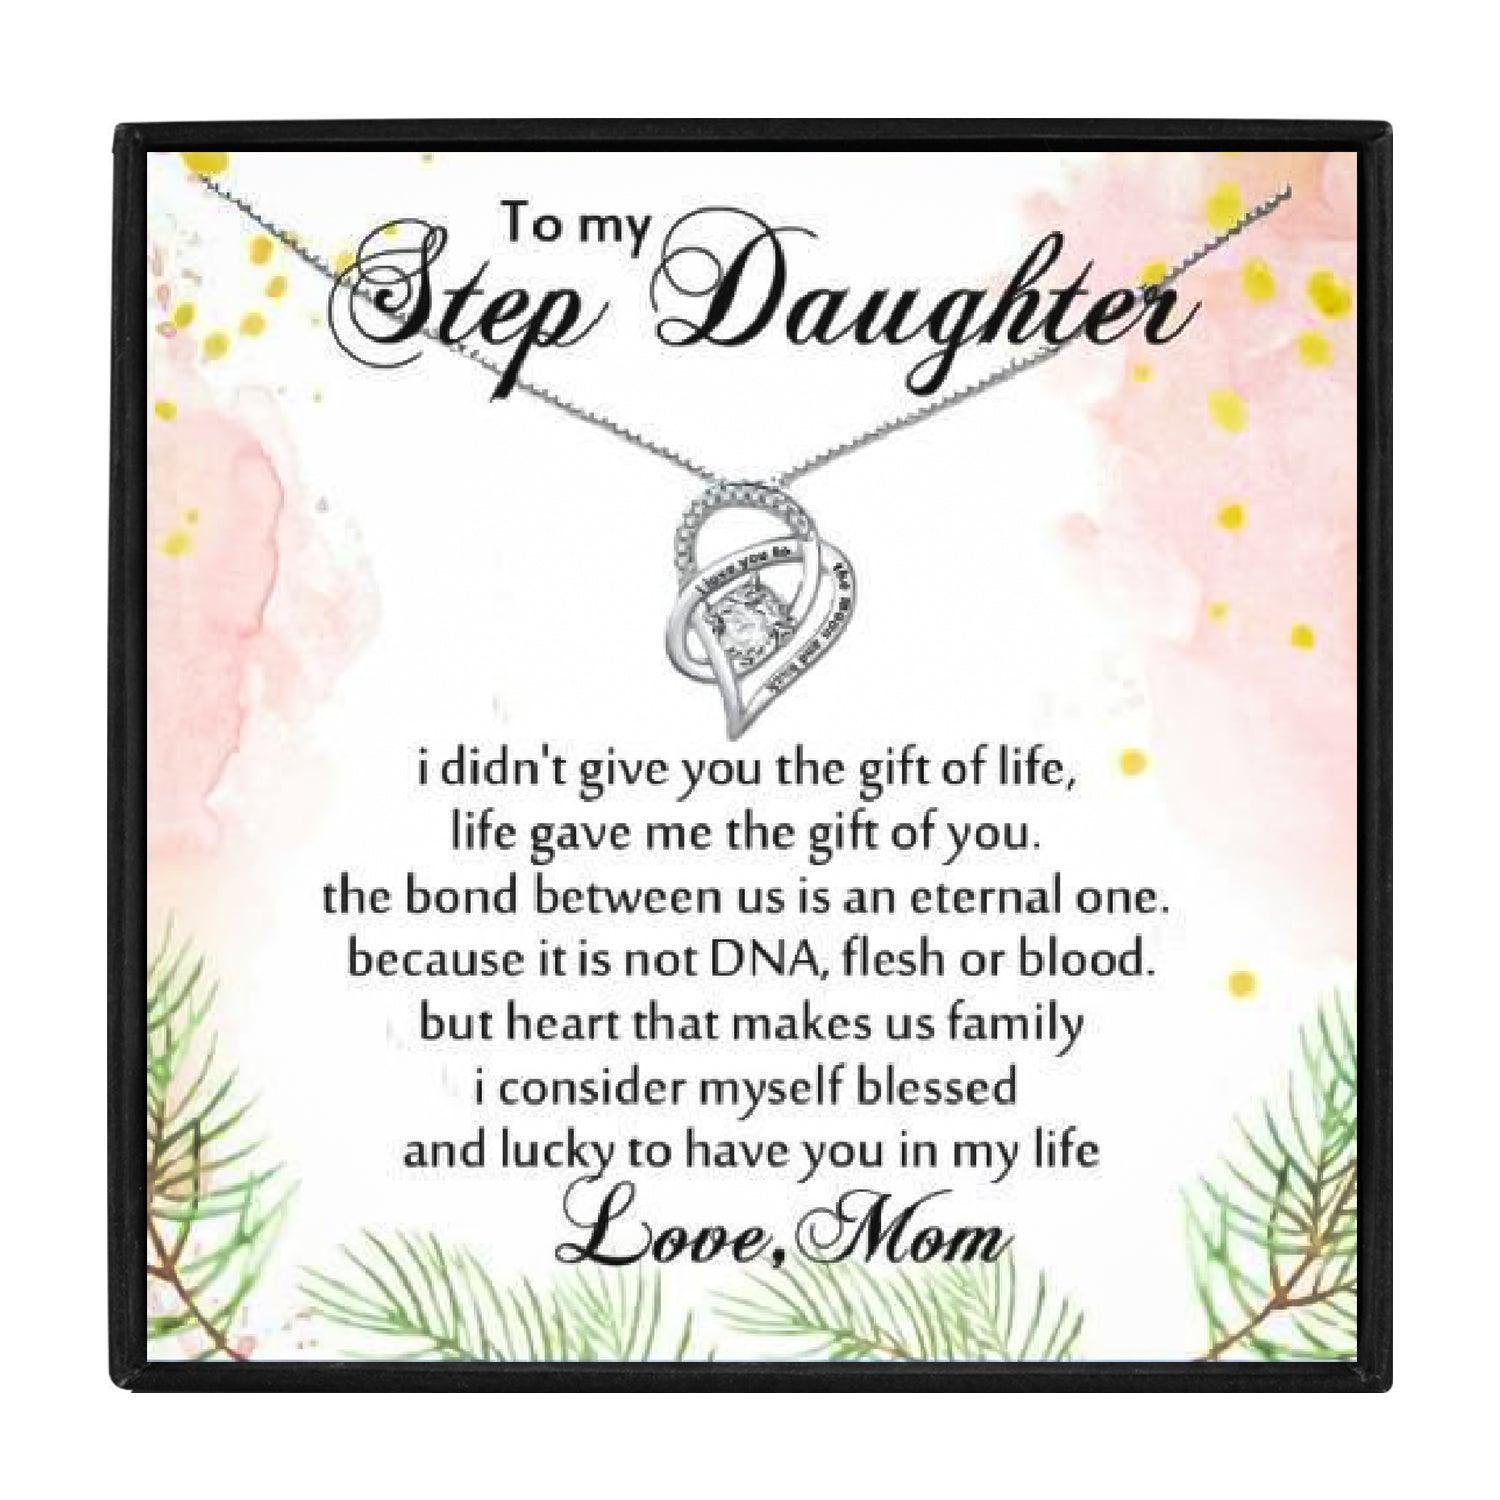 Step Daughter Necklace Gift Set From Mom in 2023 | Step Daughter Necklace Gift Set From Mom - undefined | Step Daughter Necklace, Step Daughter Necklace Gift Set | From Hunny Life | hunnylife.com